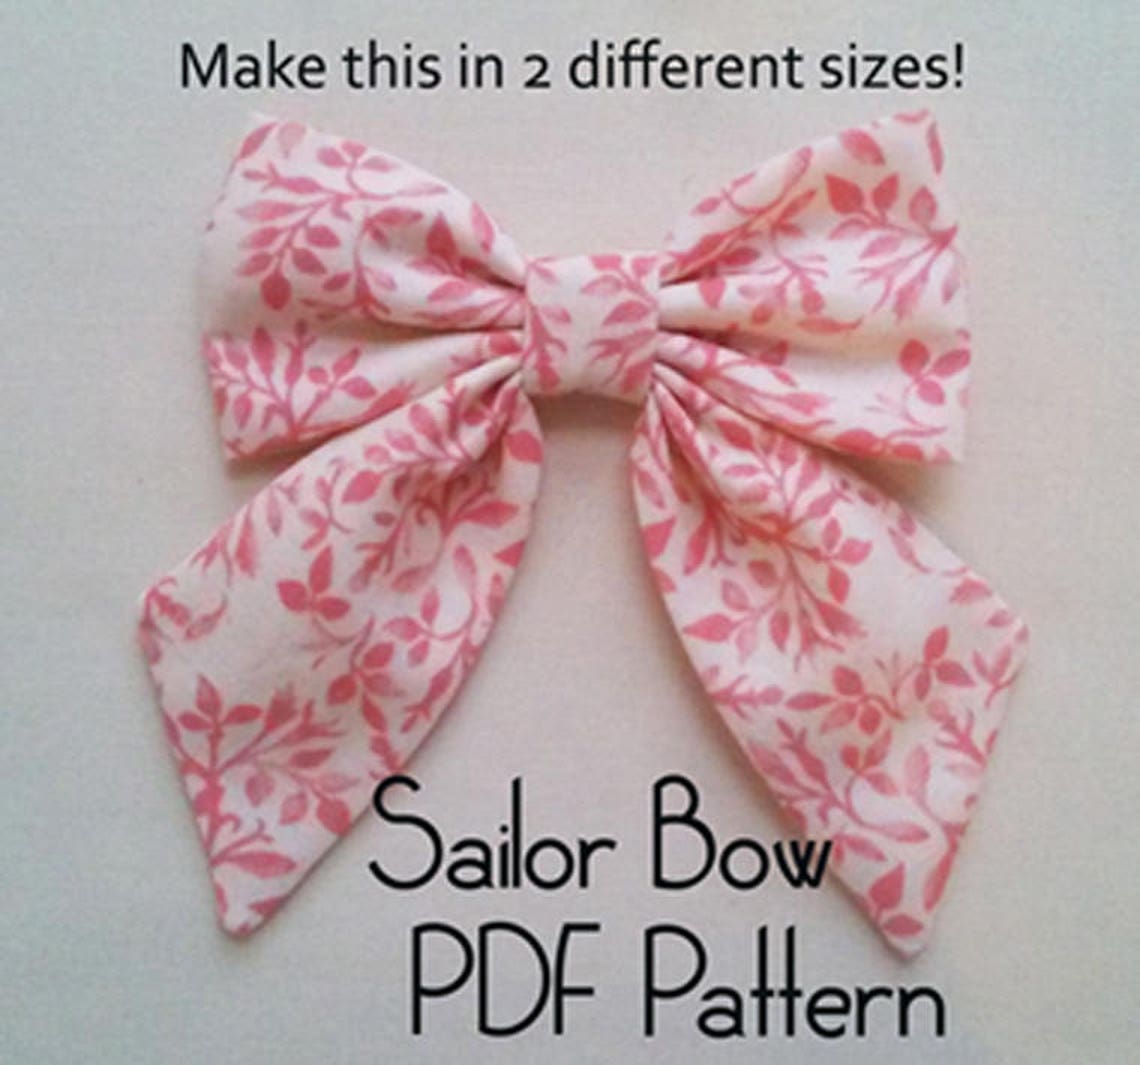 SALE Sailor Bow PDF Pattern Sewing Pattern Hair Bow | Etsy